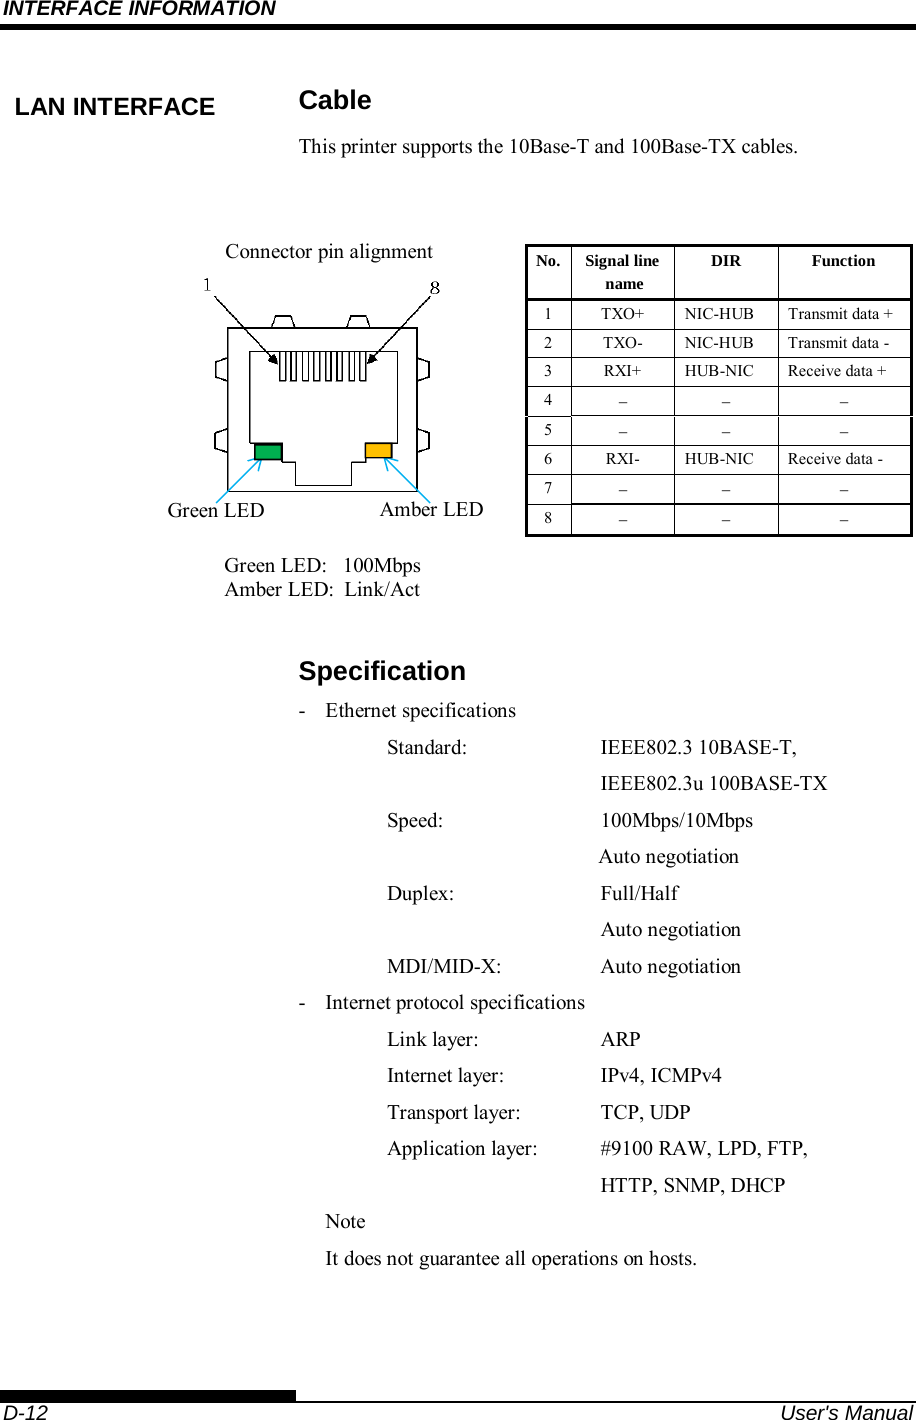 INTERFACE INFORMATION     D-12  User&apos;s Manual Cable This printer supports the 10Base-T and 100Base-TX cables.  Connector pin alignment No. Signal line name DIR Function 1  TXO+  NIC-HUB  Transmit data + 2 TXO- NIC-HUB Transmit data - 3  RXI+  HUB-NIC  Receive data + 4     5     6 RXI- HUB-NIC Receive data - 7     8       Green LED:   100Mbps Amber LED:  Link/Act  Specification - Ethernet specifications    Standard:  IEEE802.3 10BASE-T,       IEEE802.3u 100BASE-TX     Speed:  100Mbps/10Mbps         Auto negotiation    Duplex:  Full/Half       Auto negotiation    MDI/MID-X:  Auto negotiation -  Internet protocol specifications    Link layer:  ARP     Internet layer:  IPv4, ICMPv4     Transport layer:  TCP, UDP     Application layer:  #9100 RAW, LPD, FTP,       HTTP, SNMP, DHCP  Note   It does not guarantee all operations on hosts. LAN INTERFACE  Green LED  Amber LED 